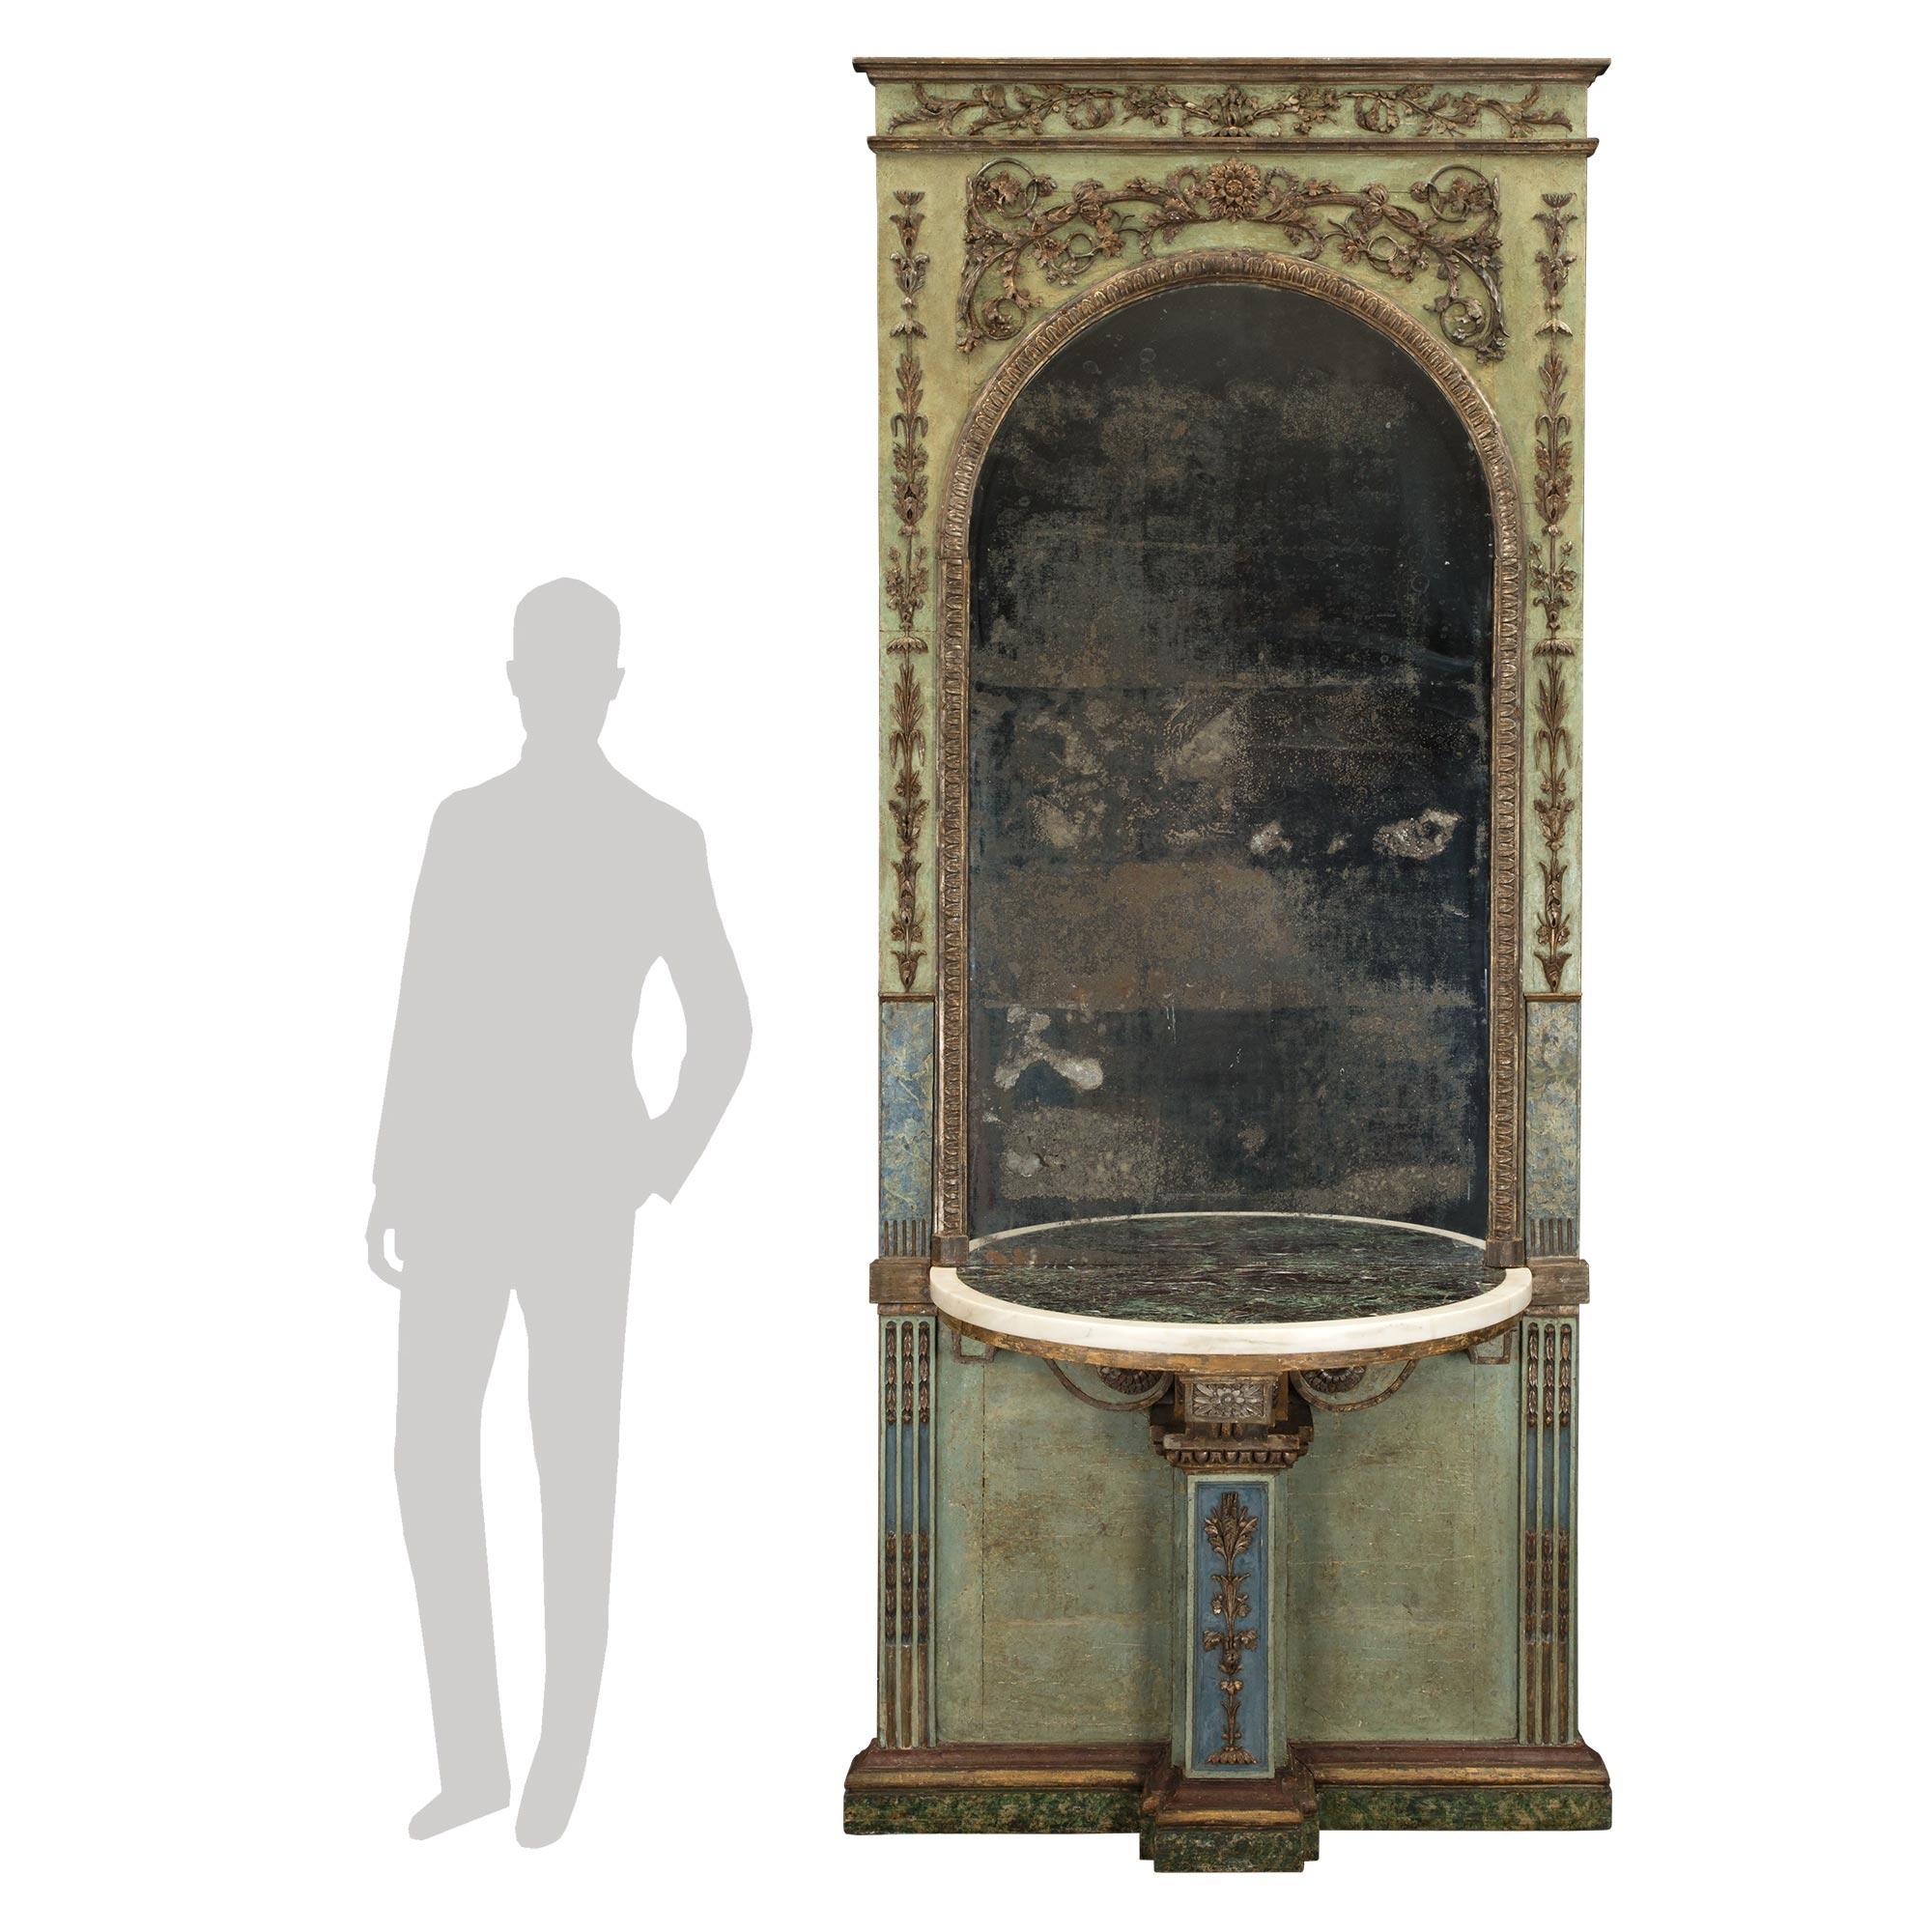 A remarkable and unique Italian 18th century Louis XIV period mecca and patinated mirror and marble console from a Genovese Carpenteria. The mirror is raised on a slim faux marble painted plinth with moulded borders. Above is the built in console